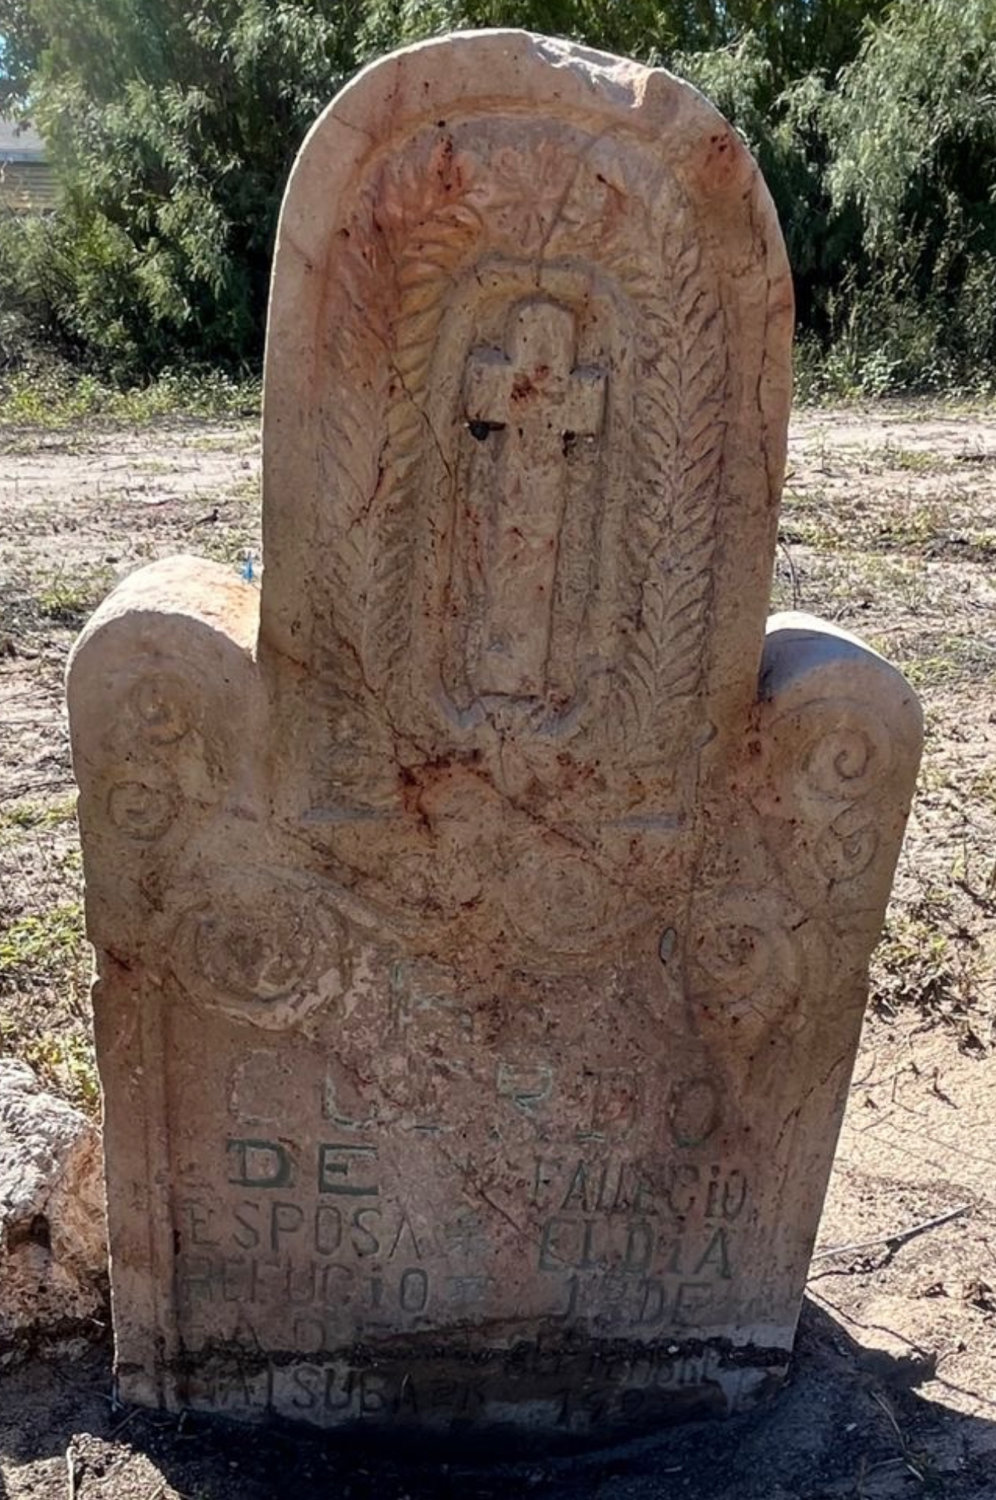 One of the gravestones at Picacho Cemetery.